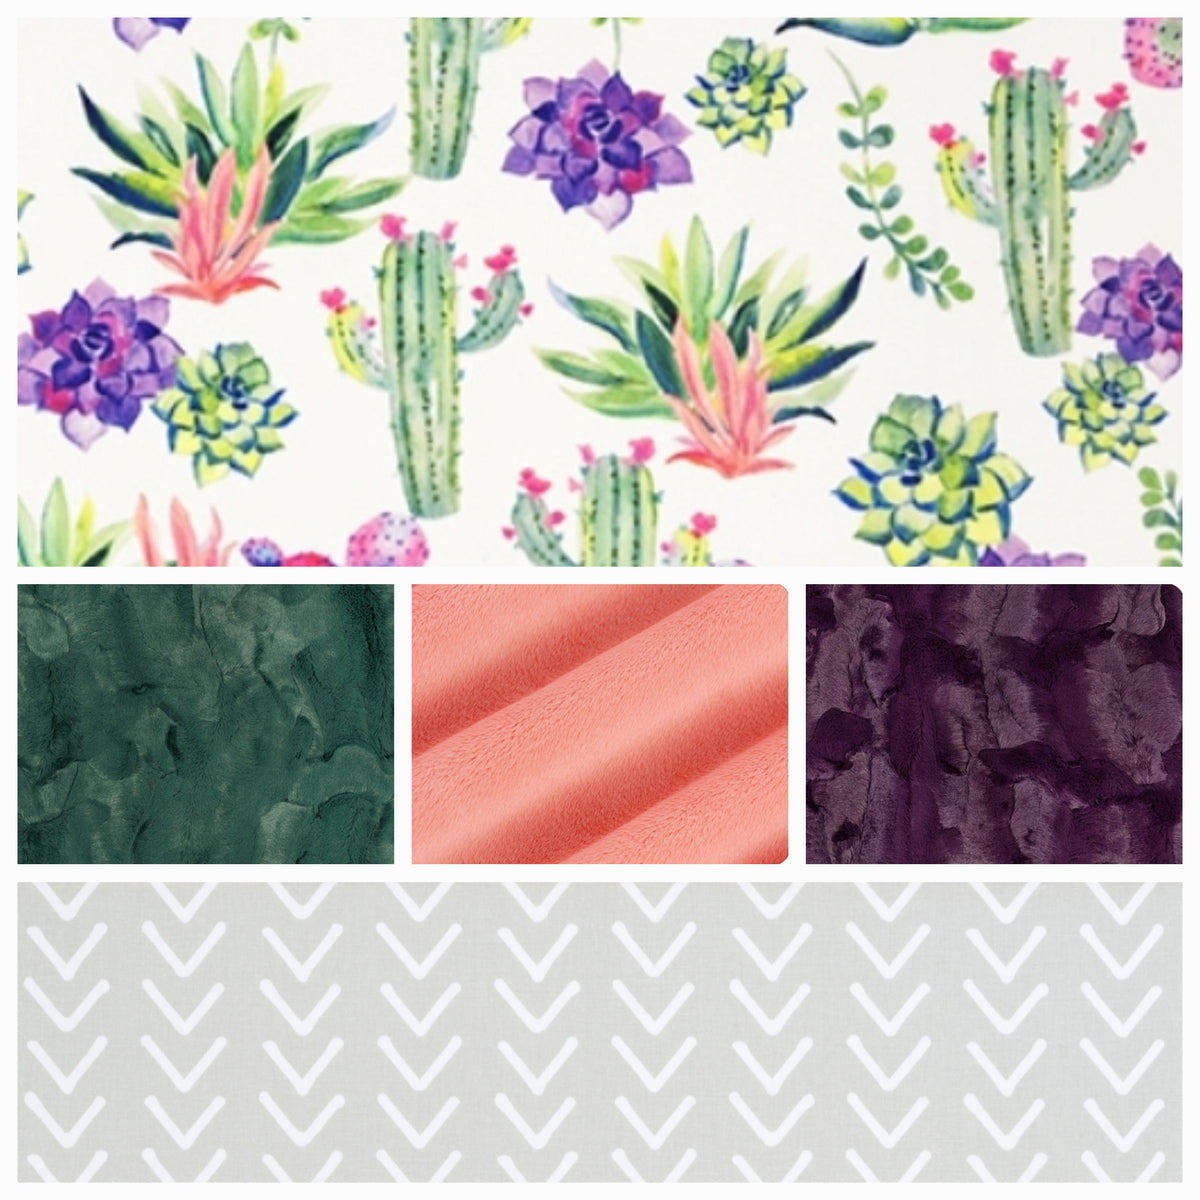 New Release Girl Crib Bedding- Cactus Minky Baby Bedding &amp; Nursery Collection - DBC Baby Bedding Co 